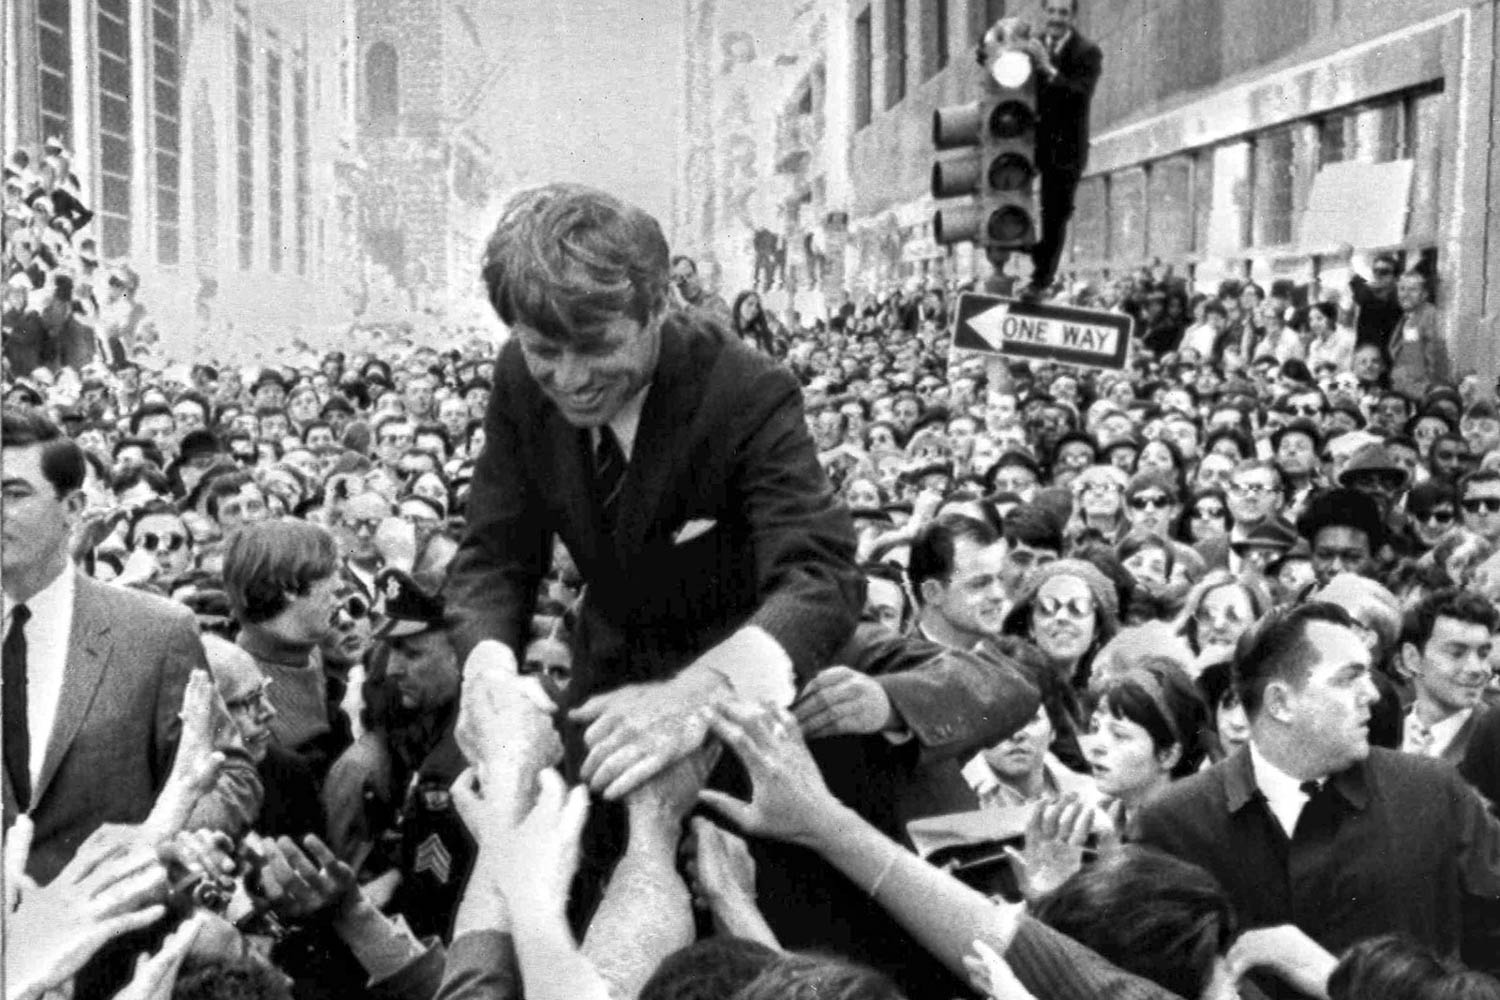 Black and white image of a JFK being lifted up above the crowd